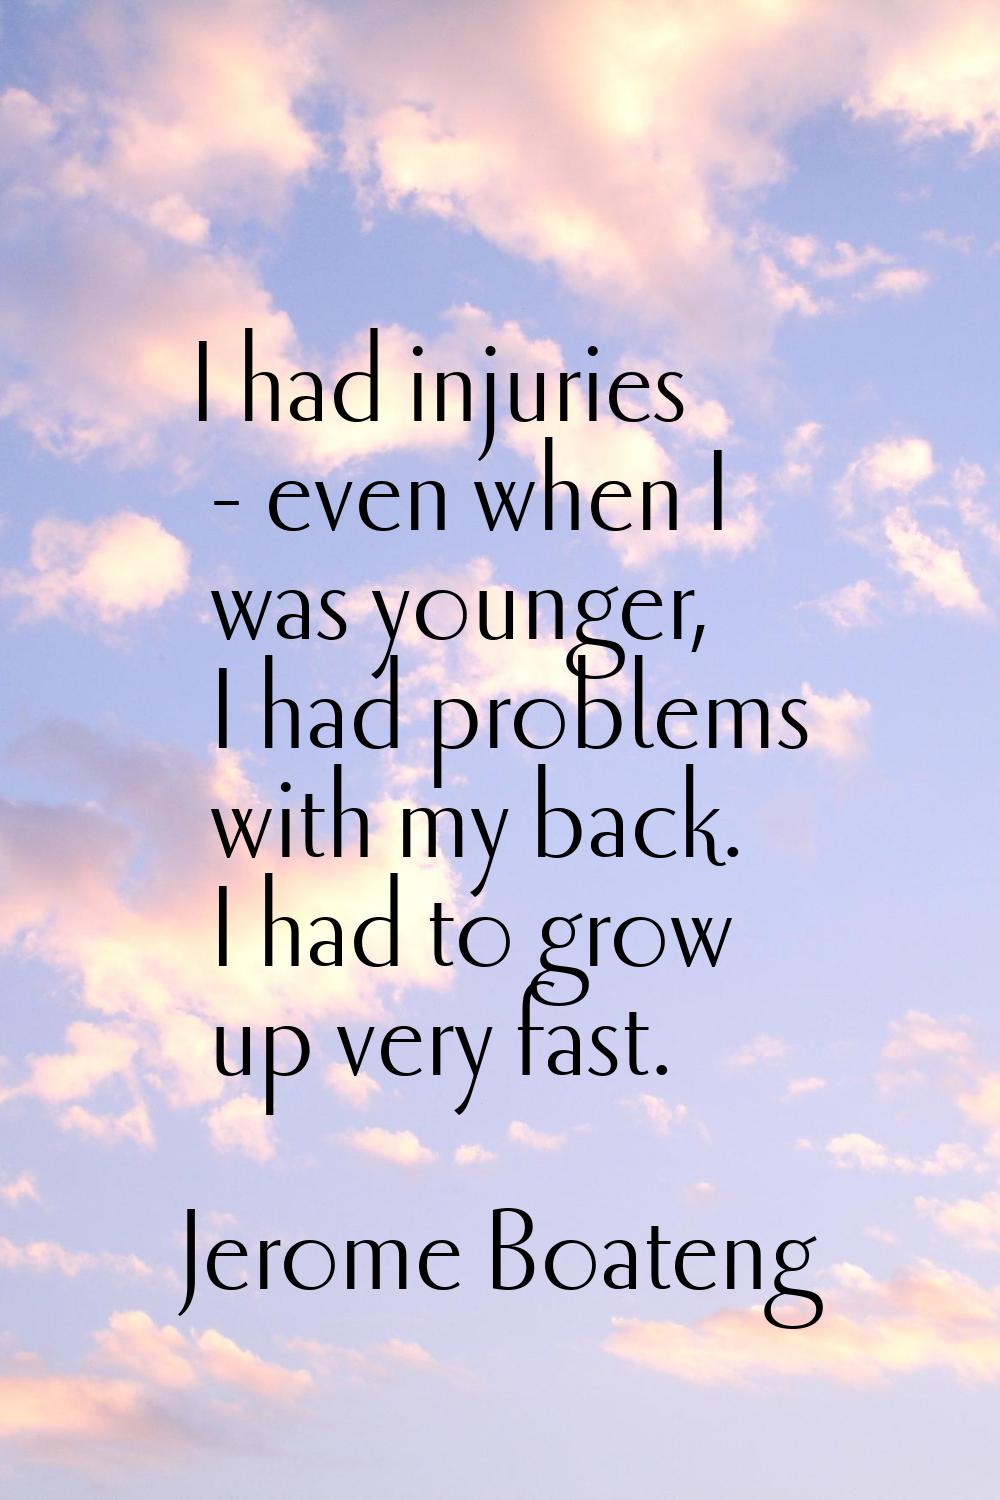 I had injuries - even when I was younger, I had problems with my back. I had to grow up very fast.